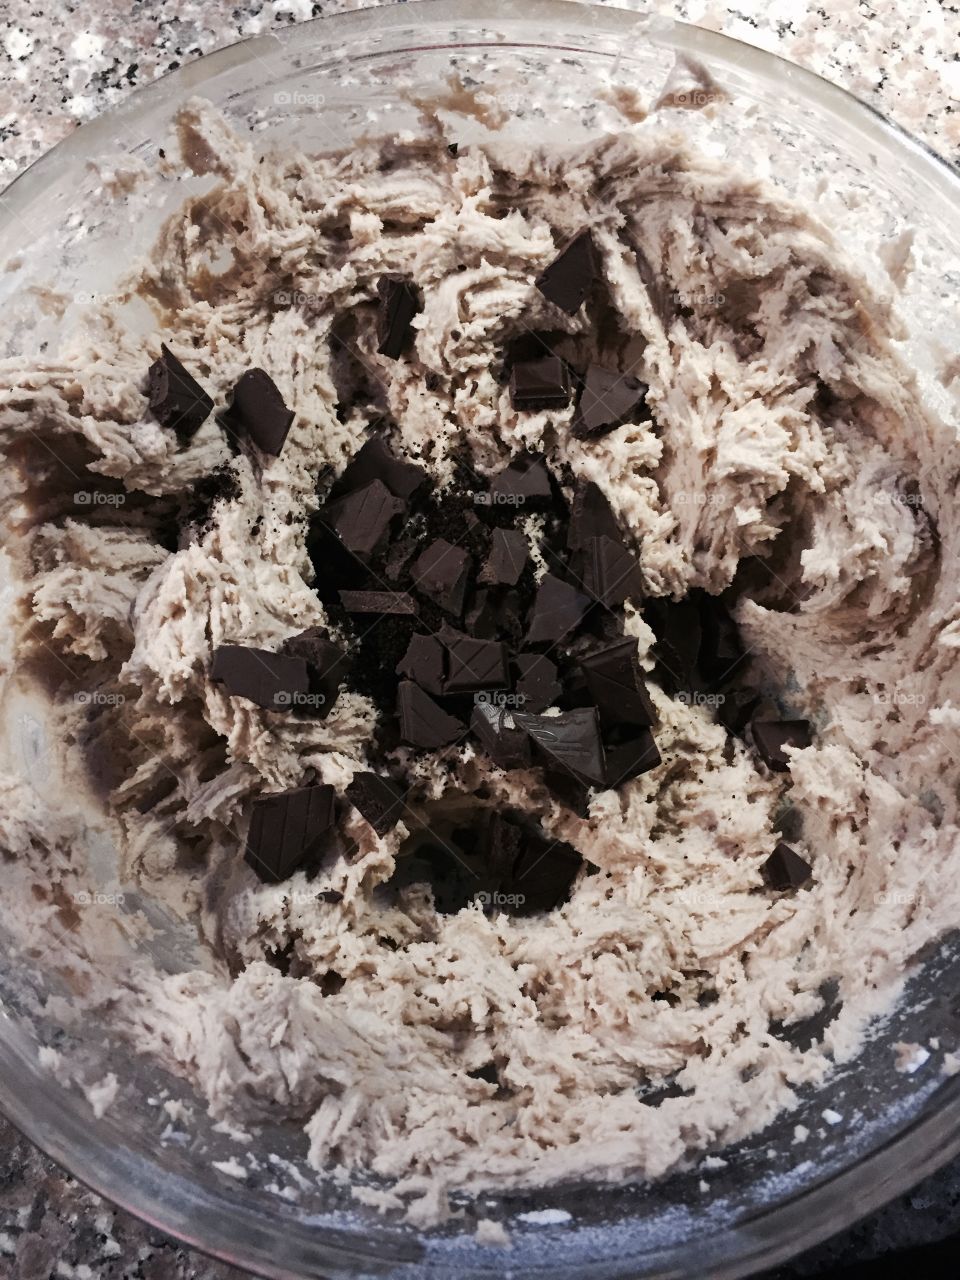 Chocolate Chip Cookie Dough. Cookie dough